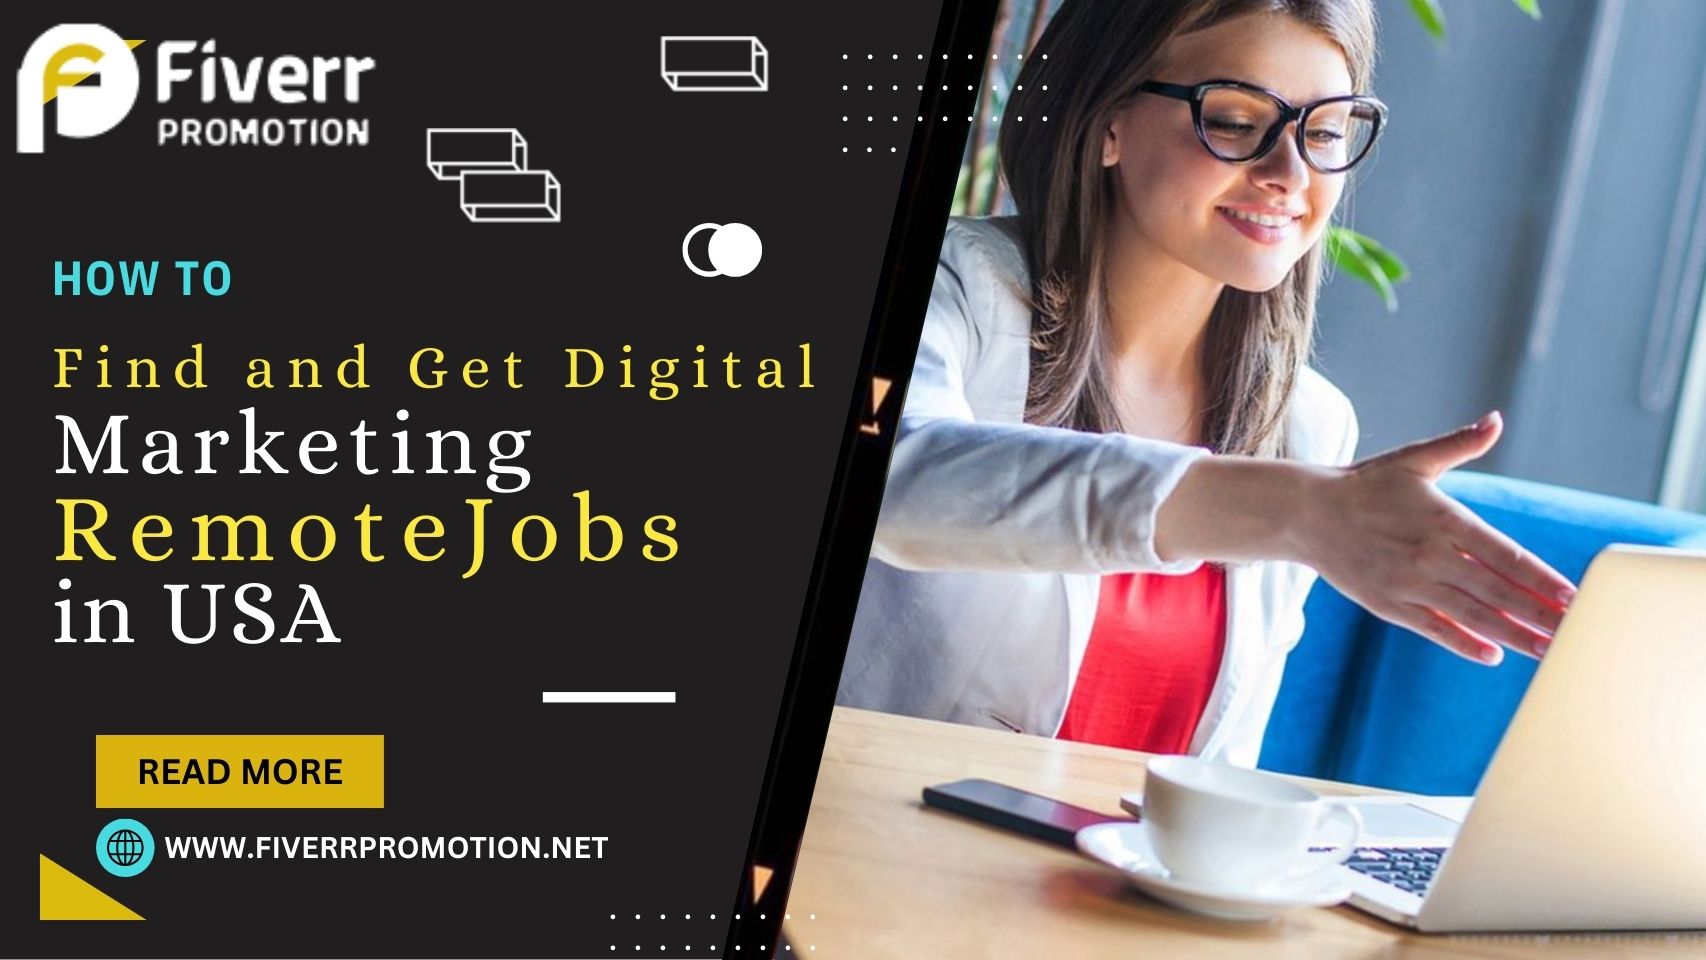 How to Find and Get Digital Marketing Remote Jobs in USA